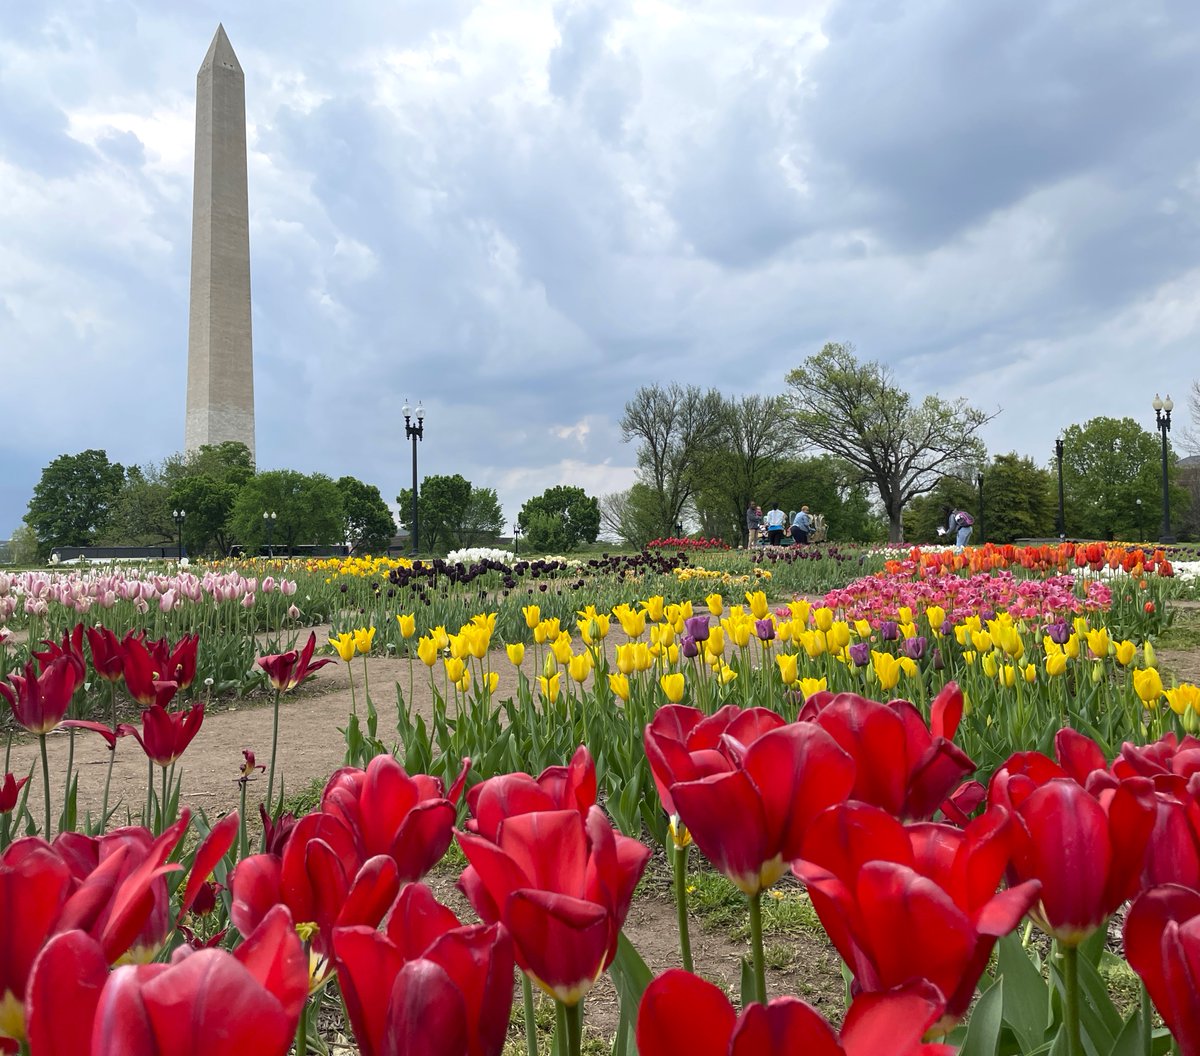 Happy Mothers Day from all of us on the National Mall to all the mothers who have loved, led, sacrificed, educated & inspired generations!